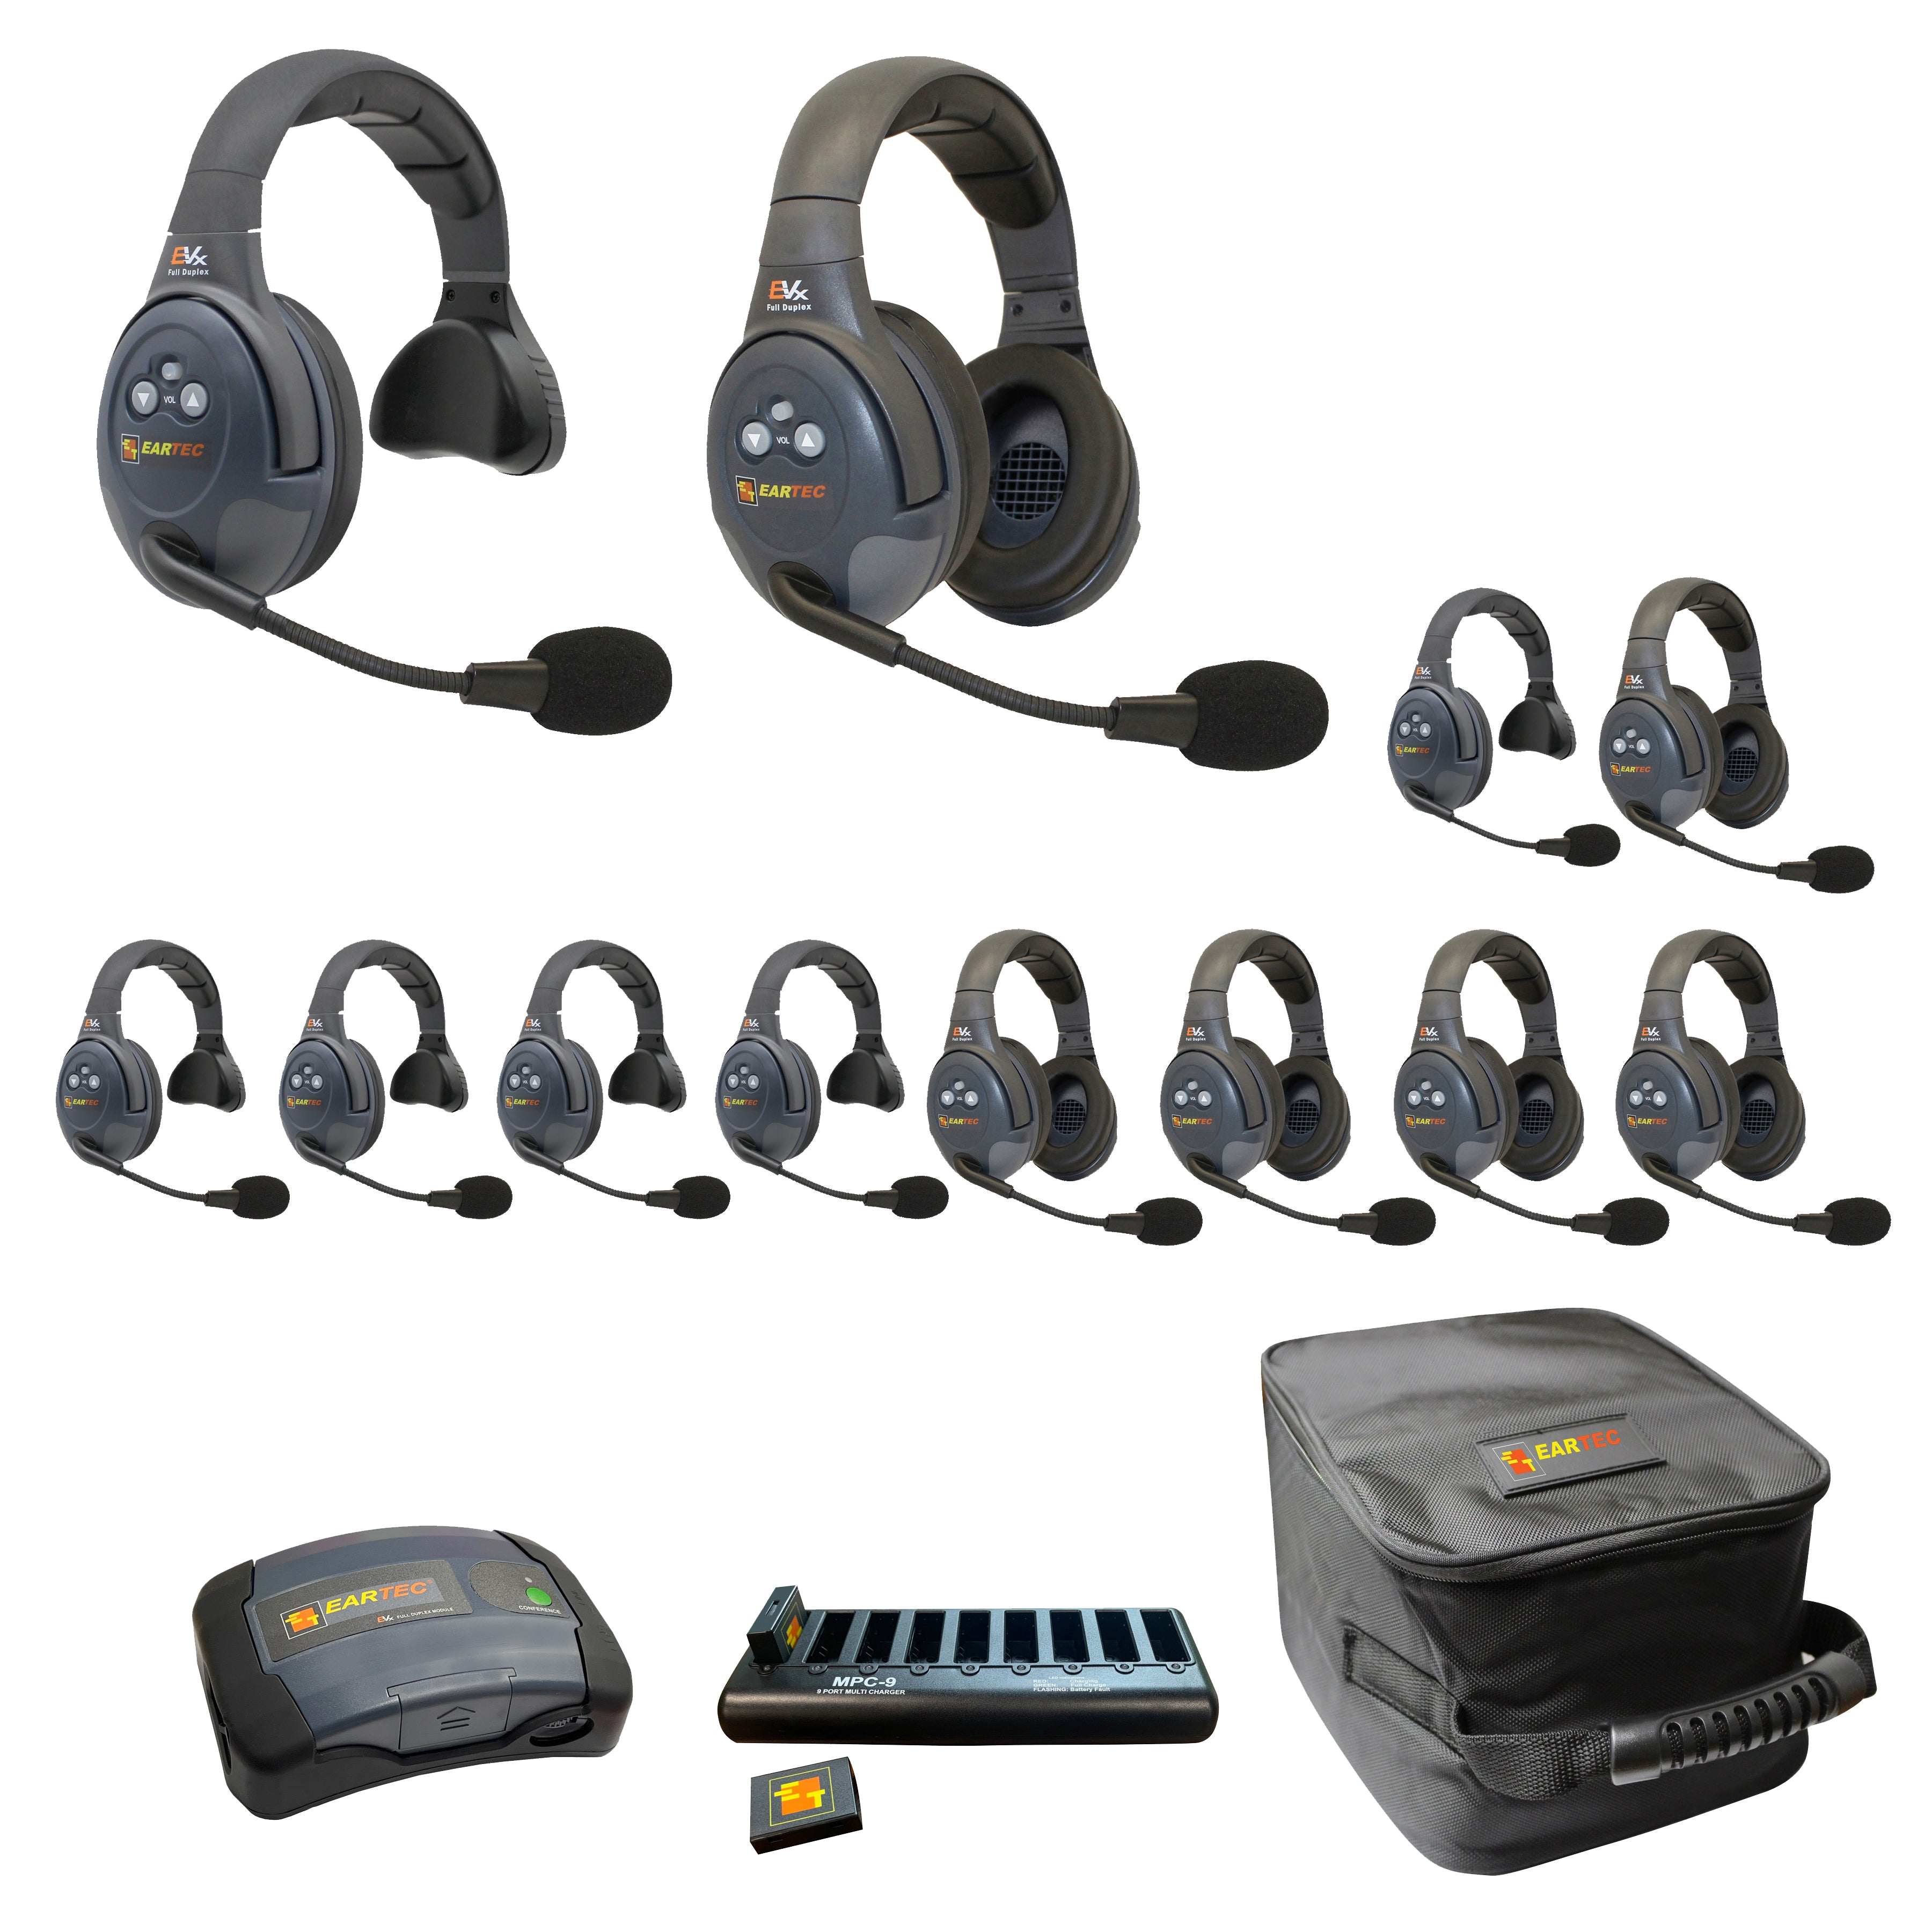 Eartec 1- EVADE C-MOD 2- EVADE Single-Ear Main Headset 6- EVADE Single-Ear Remote Headset 6- EVADE Double-Ear Remote Headsets 2- 9-Port Charger w/ Adapter 2- Extra large Soft Padded Case 12 X Lithium-Polymer Batteries EVX1266-CM